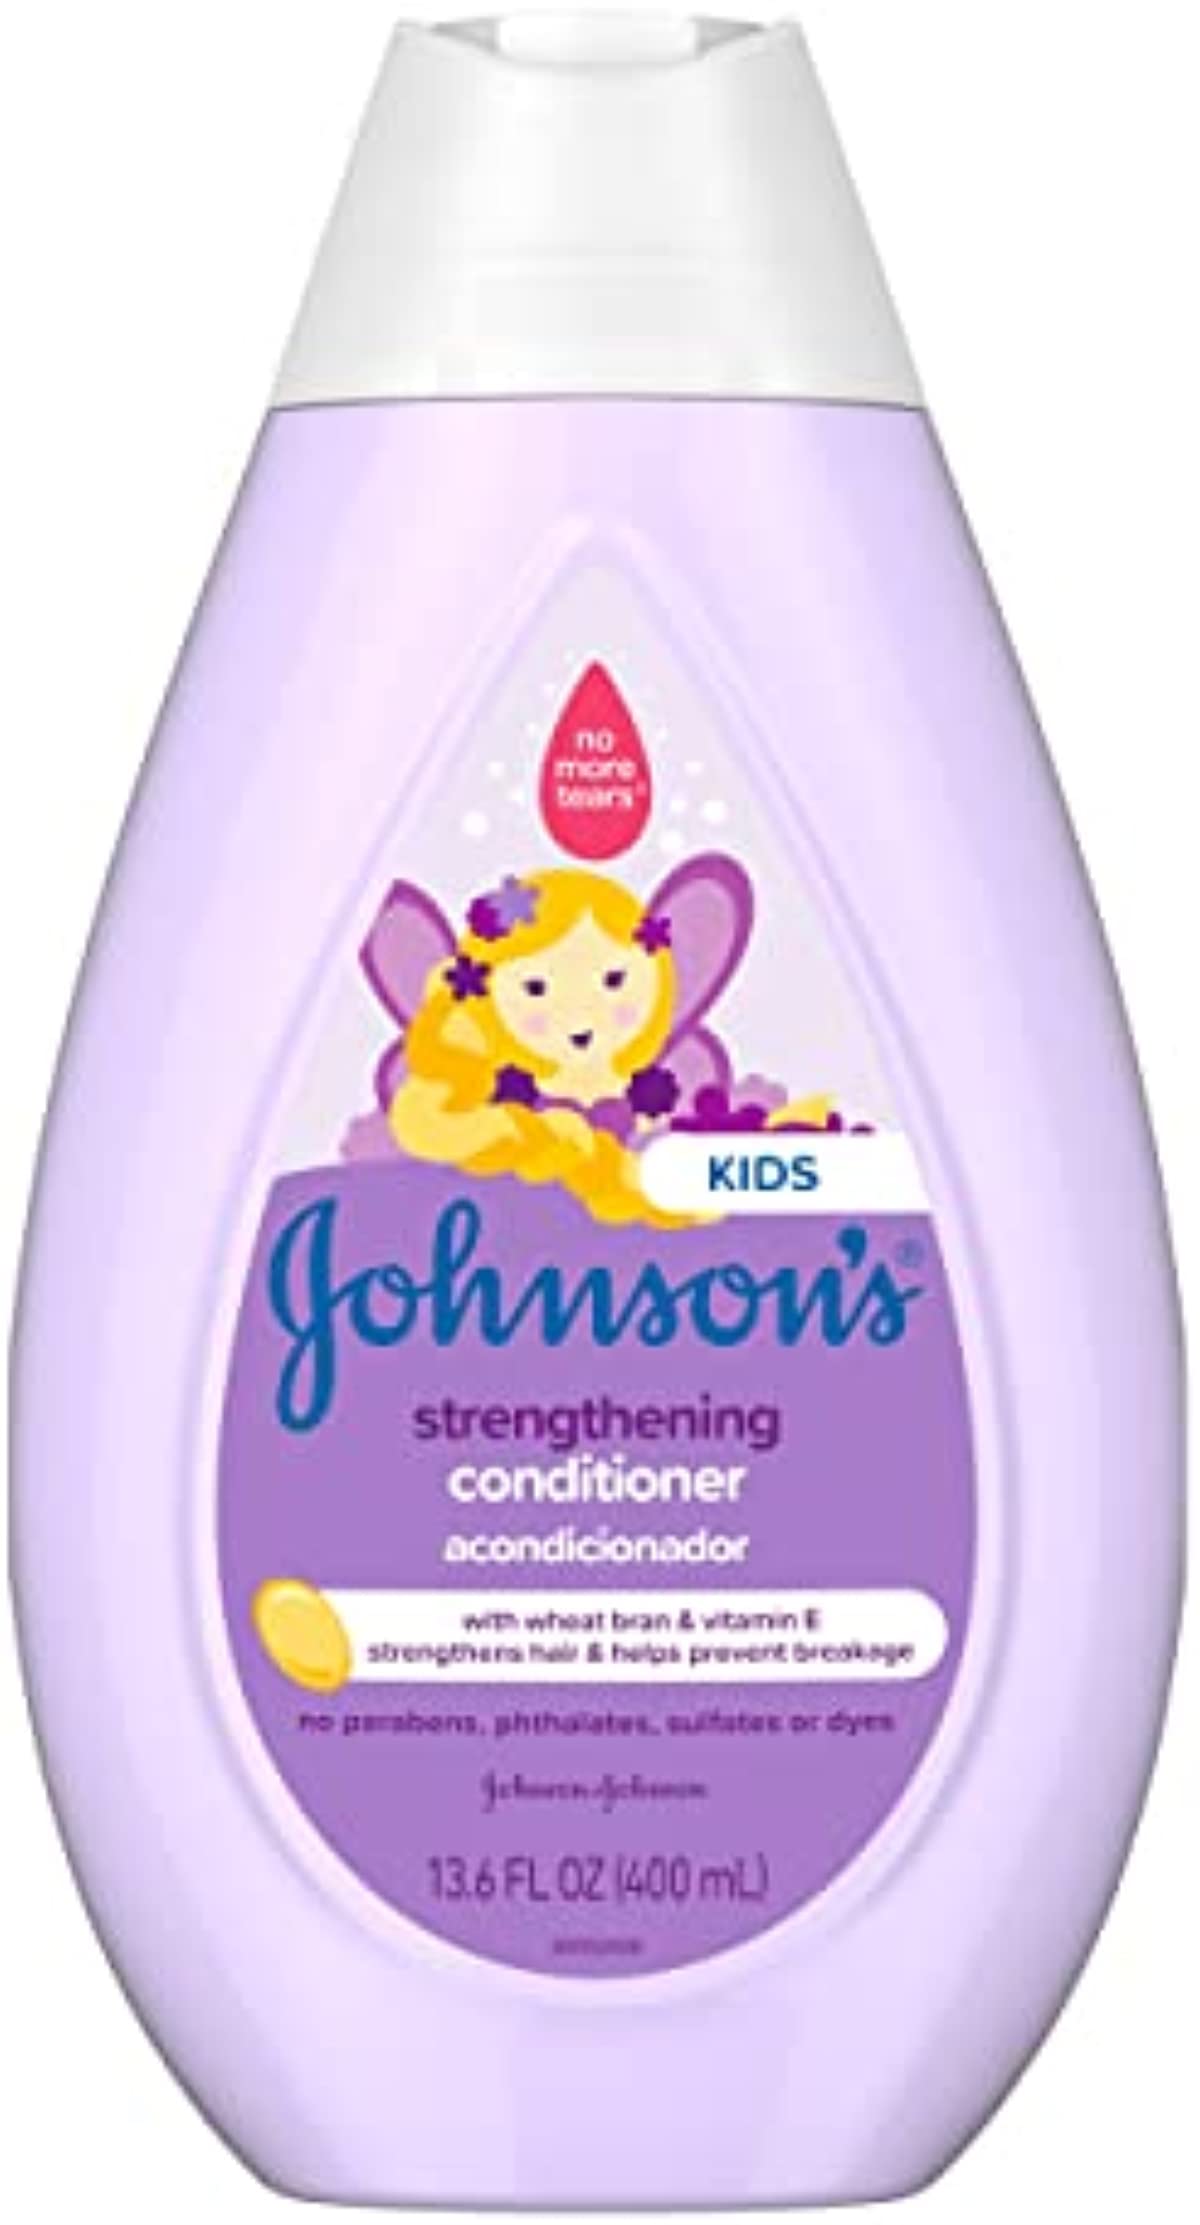 Johnson\'s Strengthening Tear-Free Kids\' Conditioner with Vitamin E Strengthens & Helps Prevent Breakage, Paraben-, Sulfate- & Dye-Free, Hypoallergenic & Gentle on Toddler Hair, 13.6 fl. oz